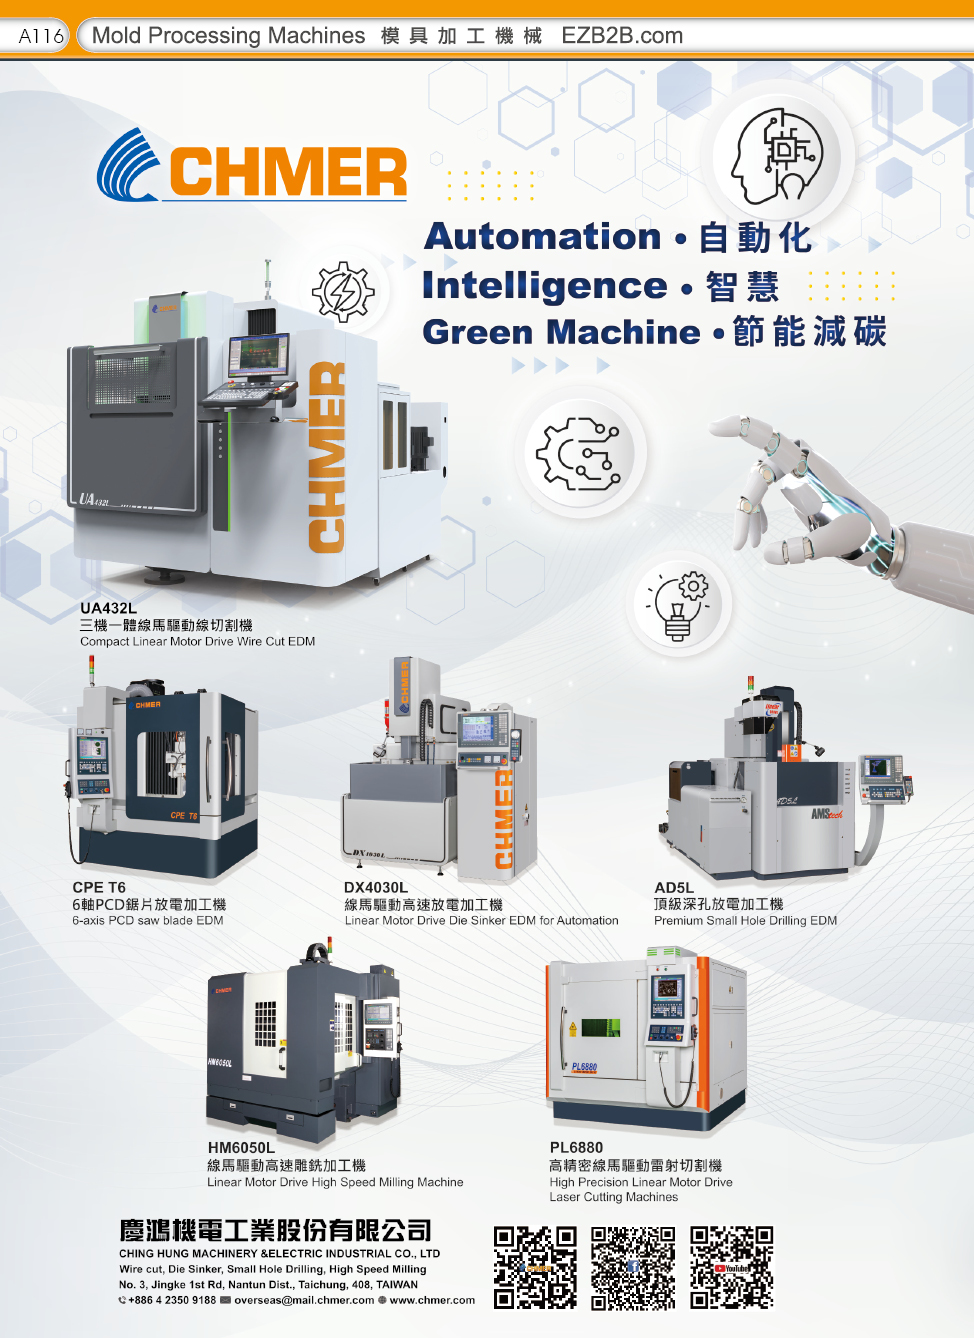 CHING-HUNG MACHINERY & ELECTRIC INDUSTRIAL CO., LTD.